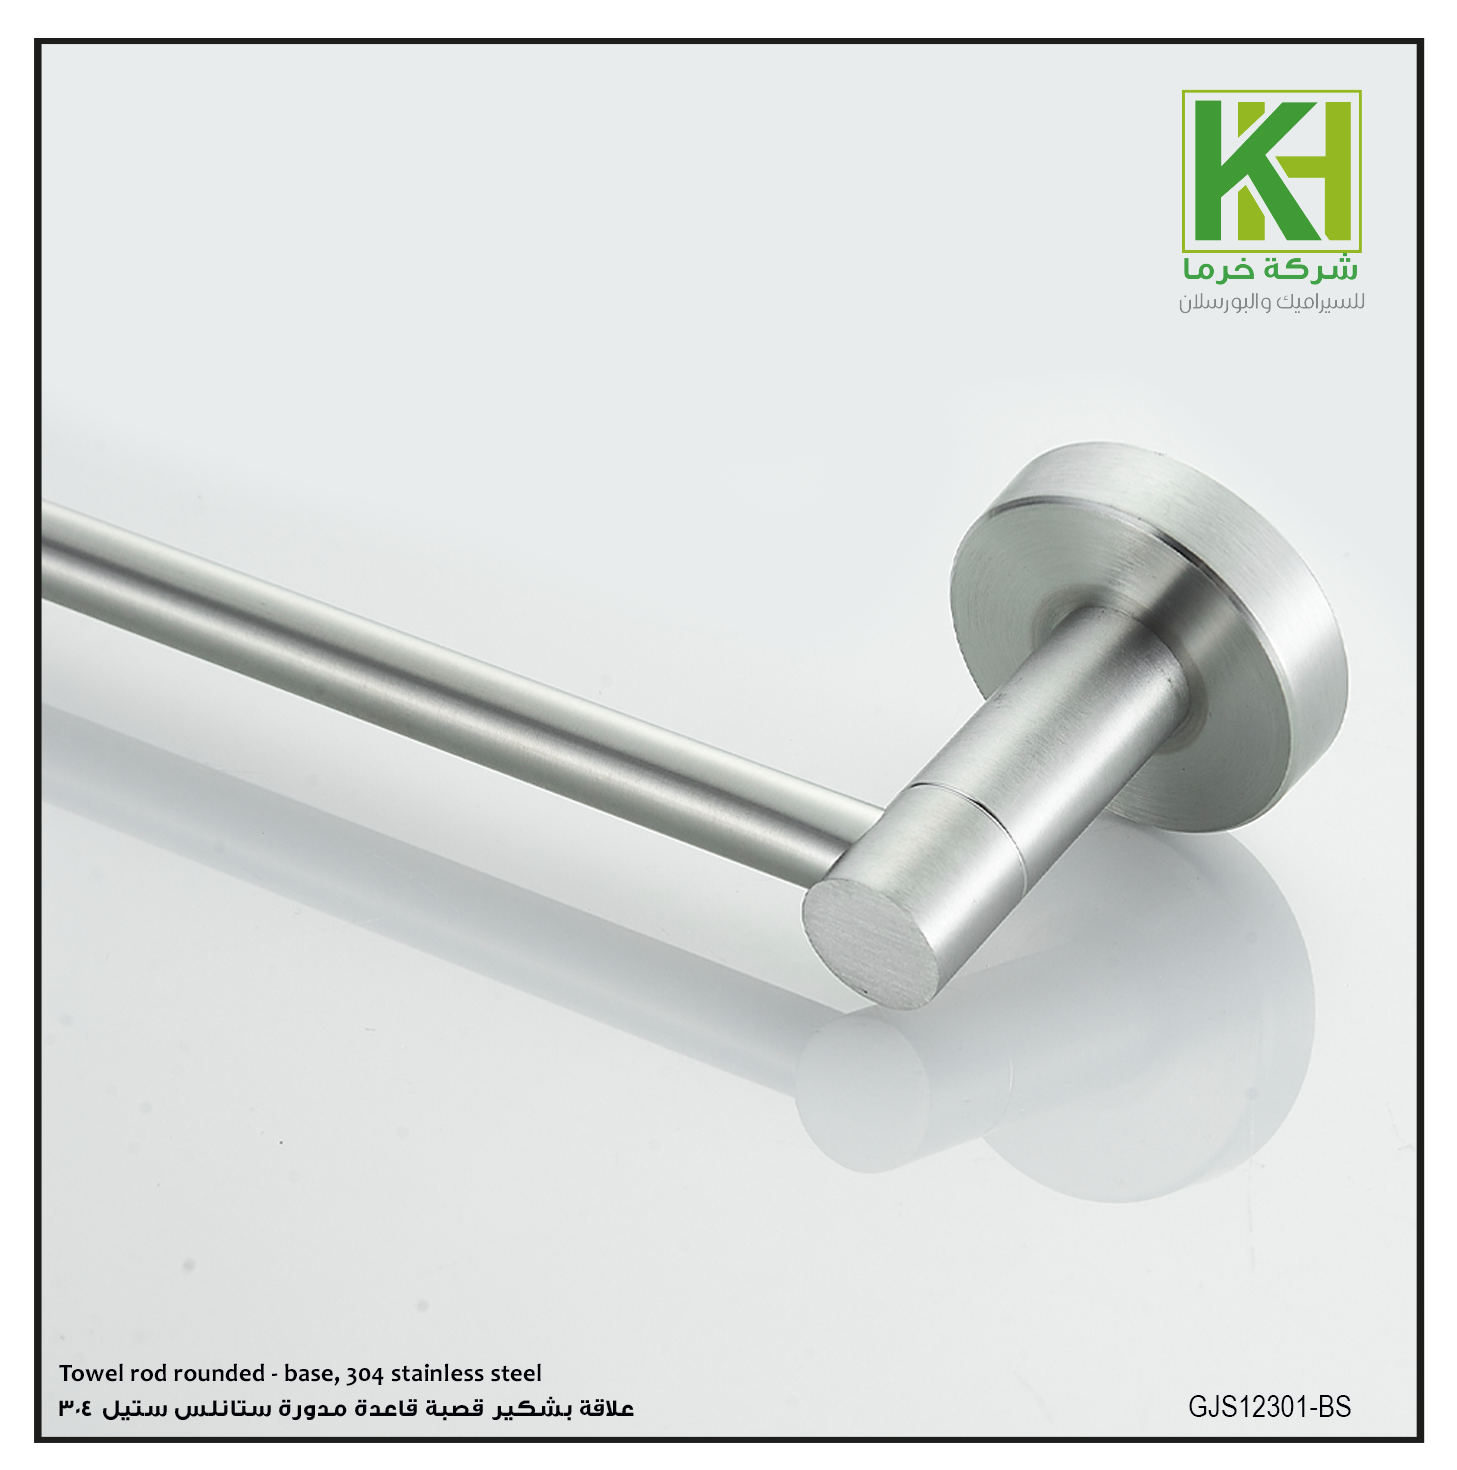 Picture of Towel rod rounded - base, stainless steel 304